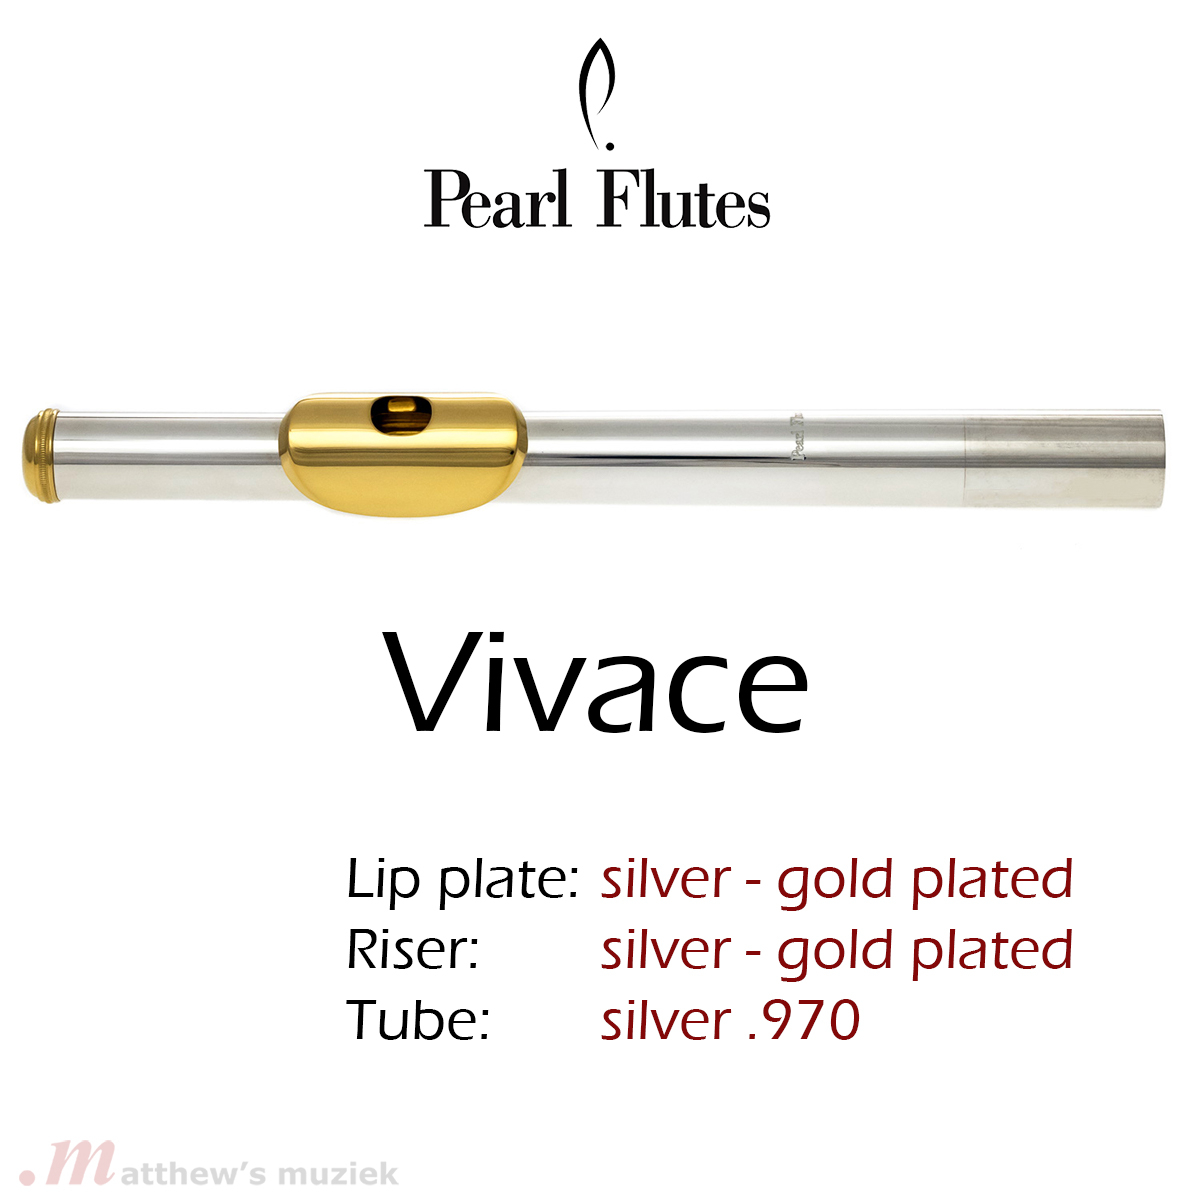 Pearl Flute Headjoint - Vivace .970 Silver - Gold Plated Lipplate, Riser and Crown